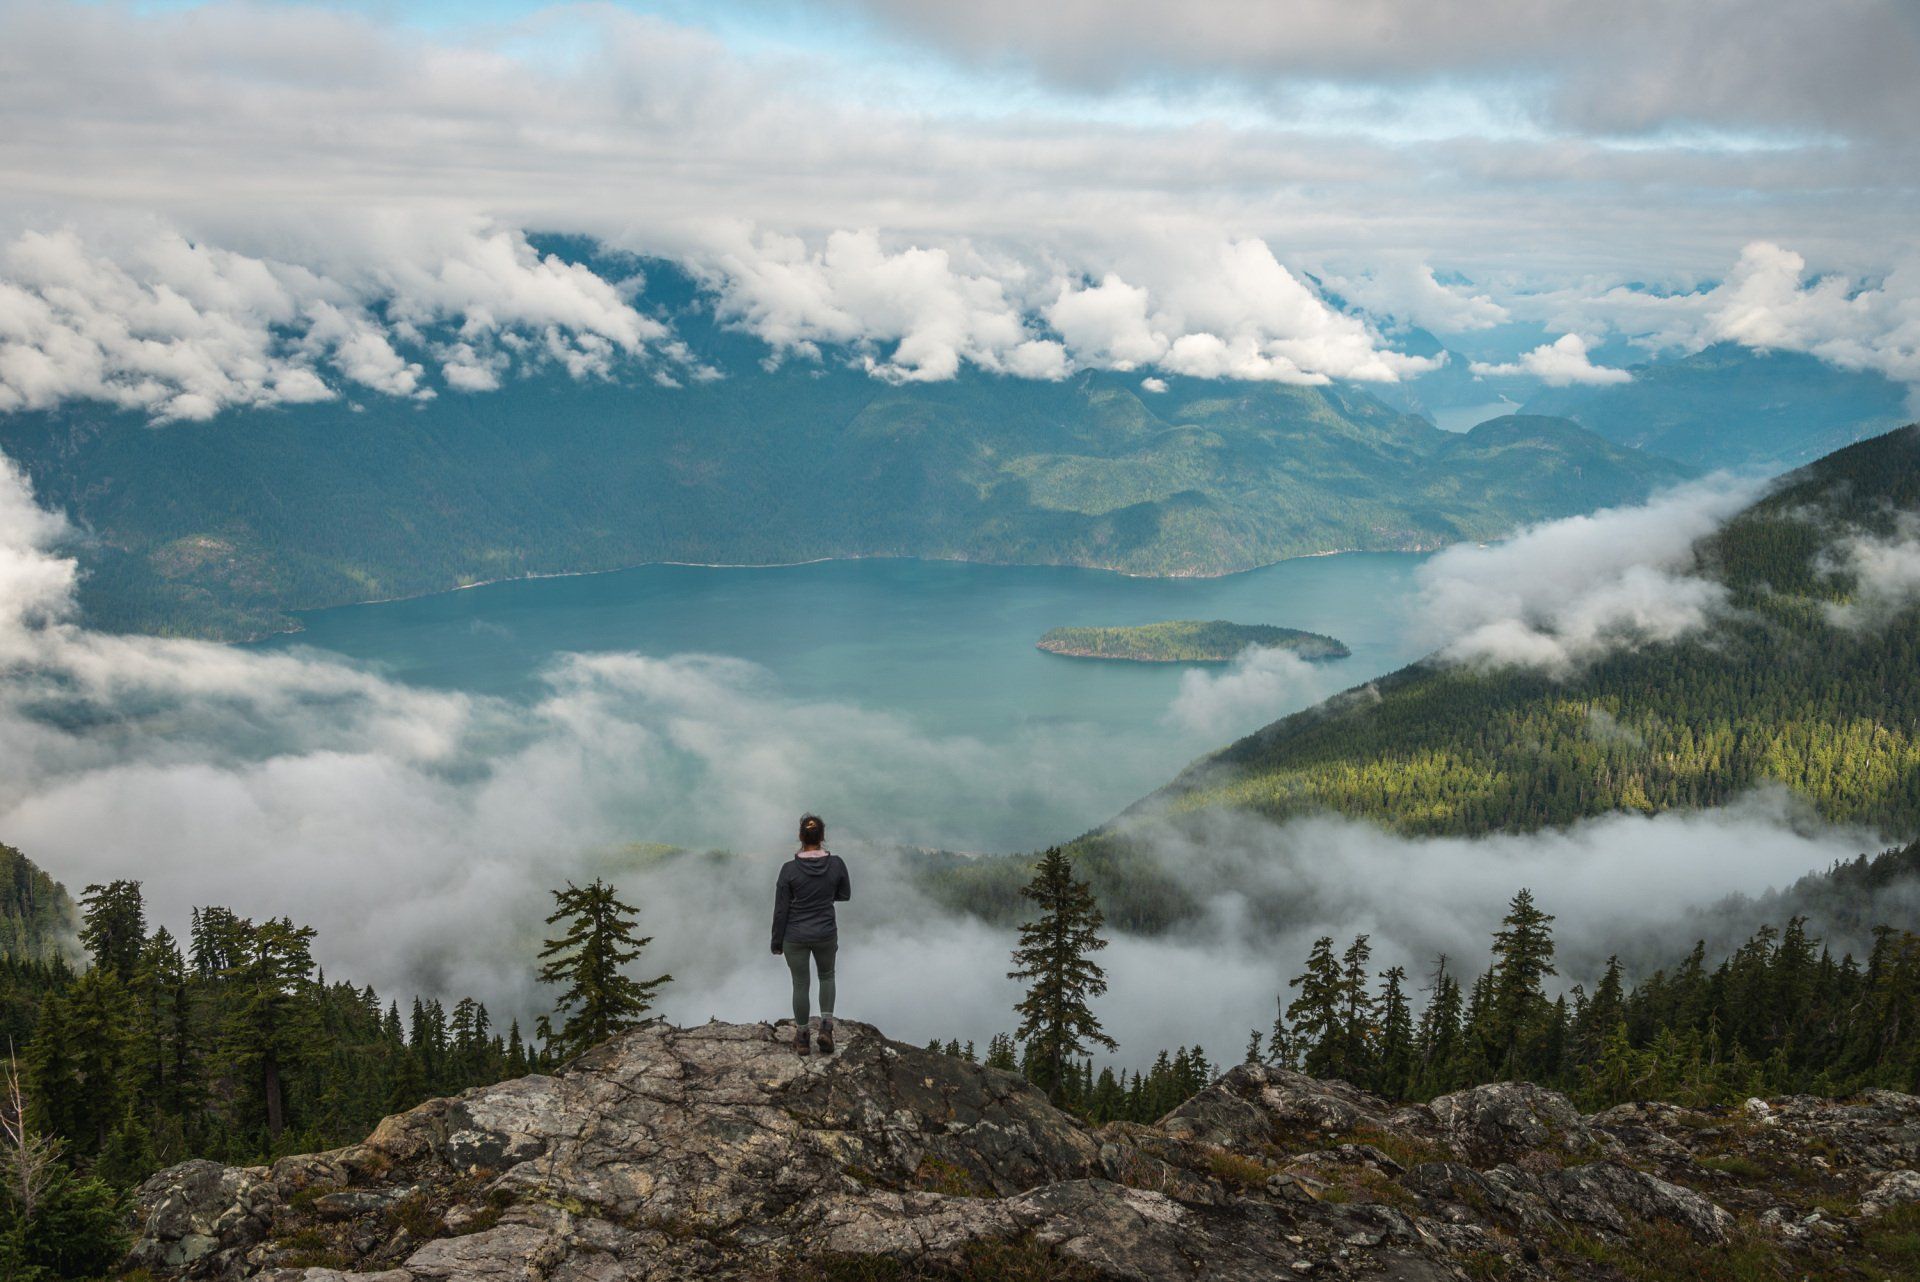 View of Pitt lake from the ridge of Golden Ears mountain, BC, Canada